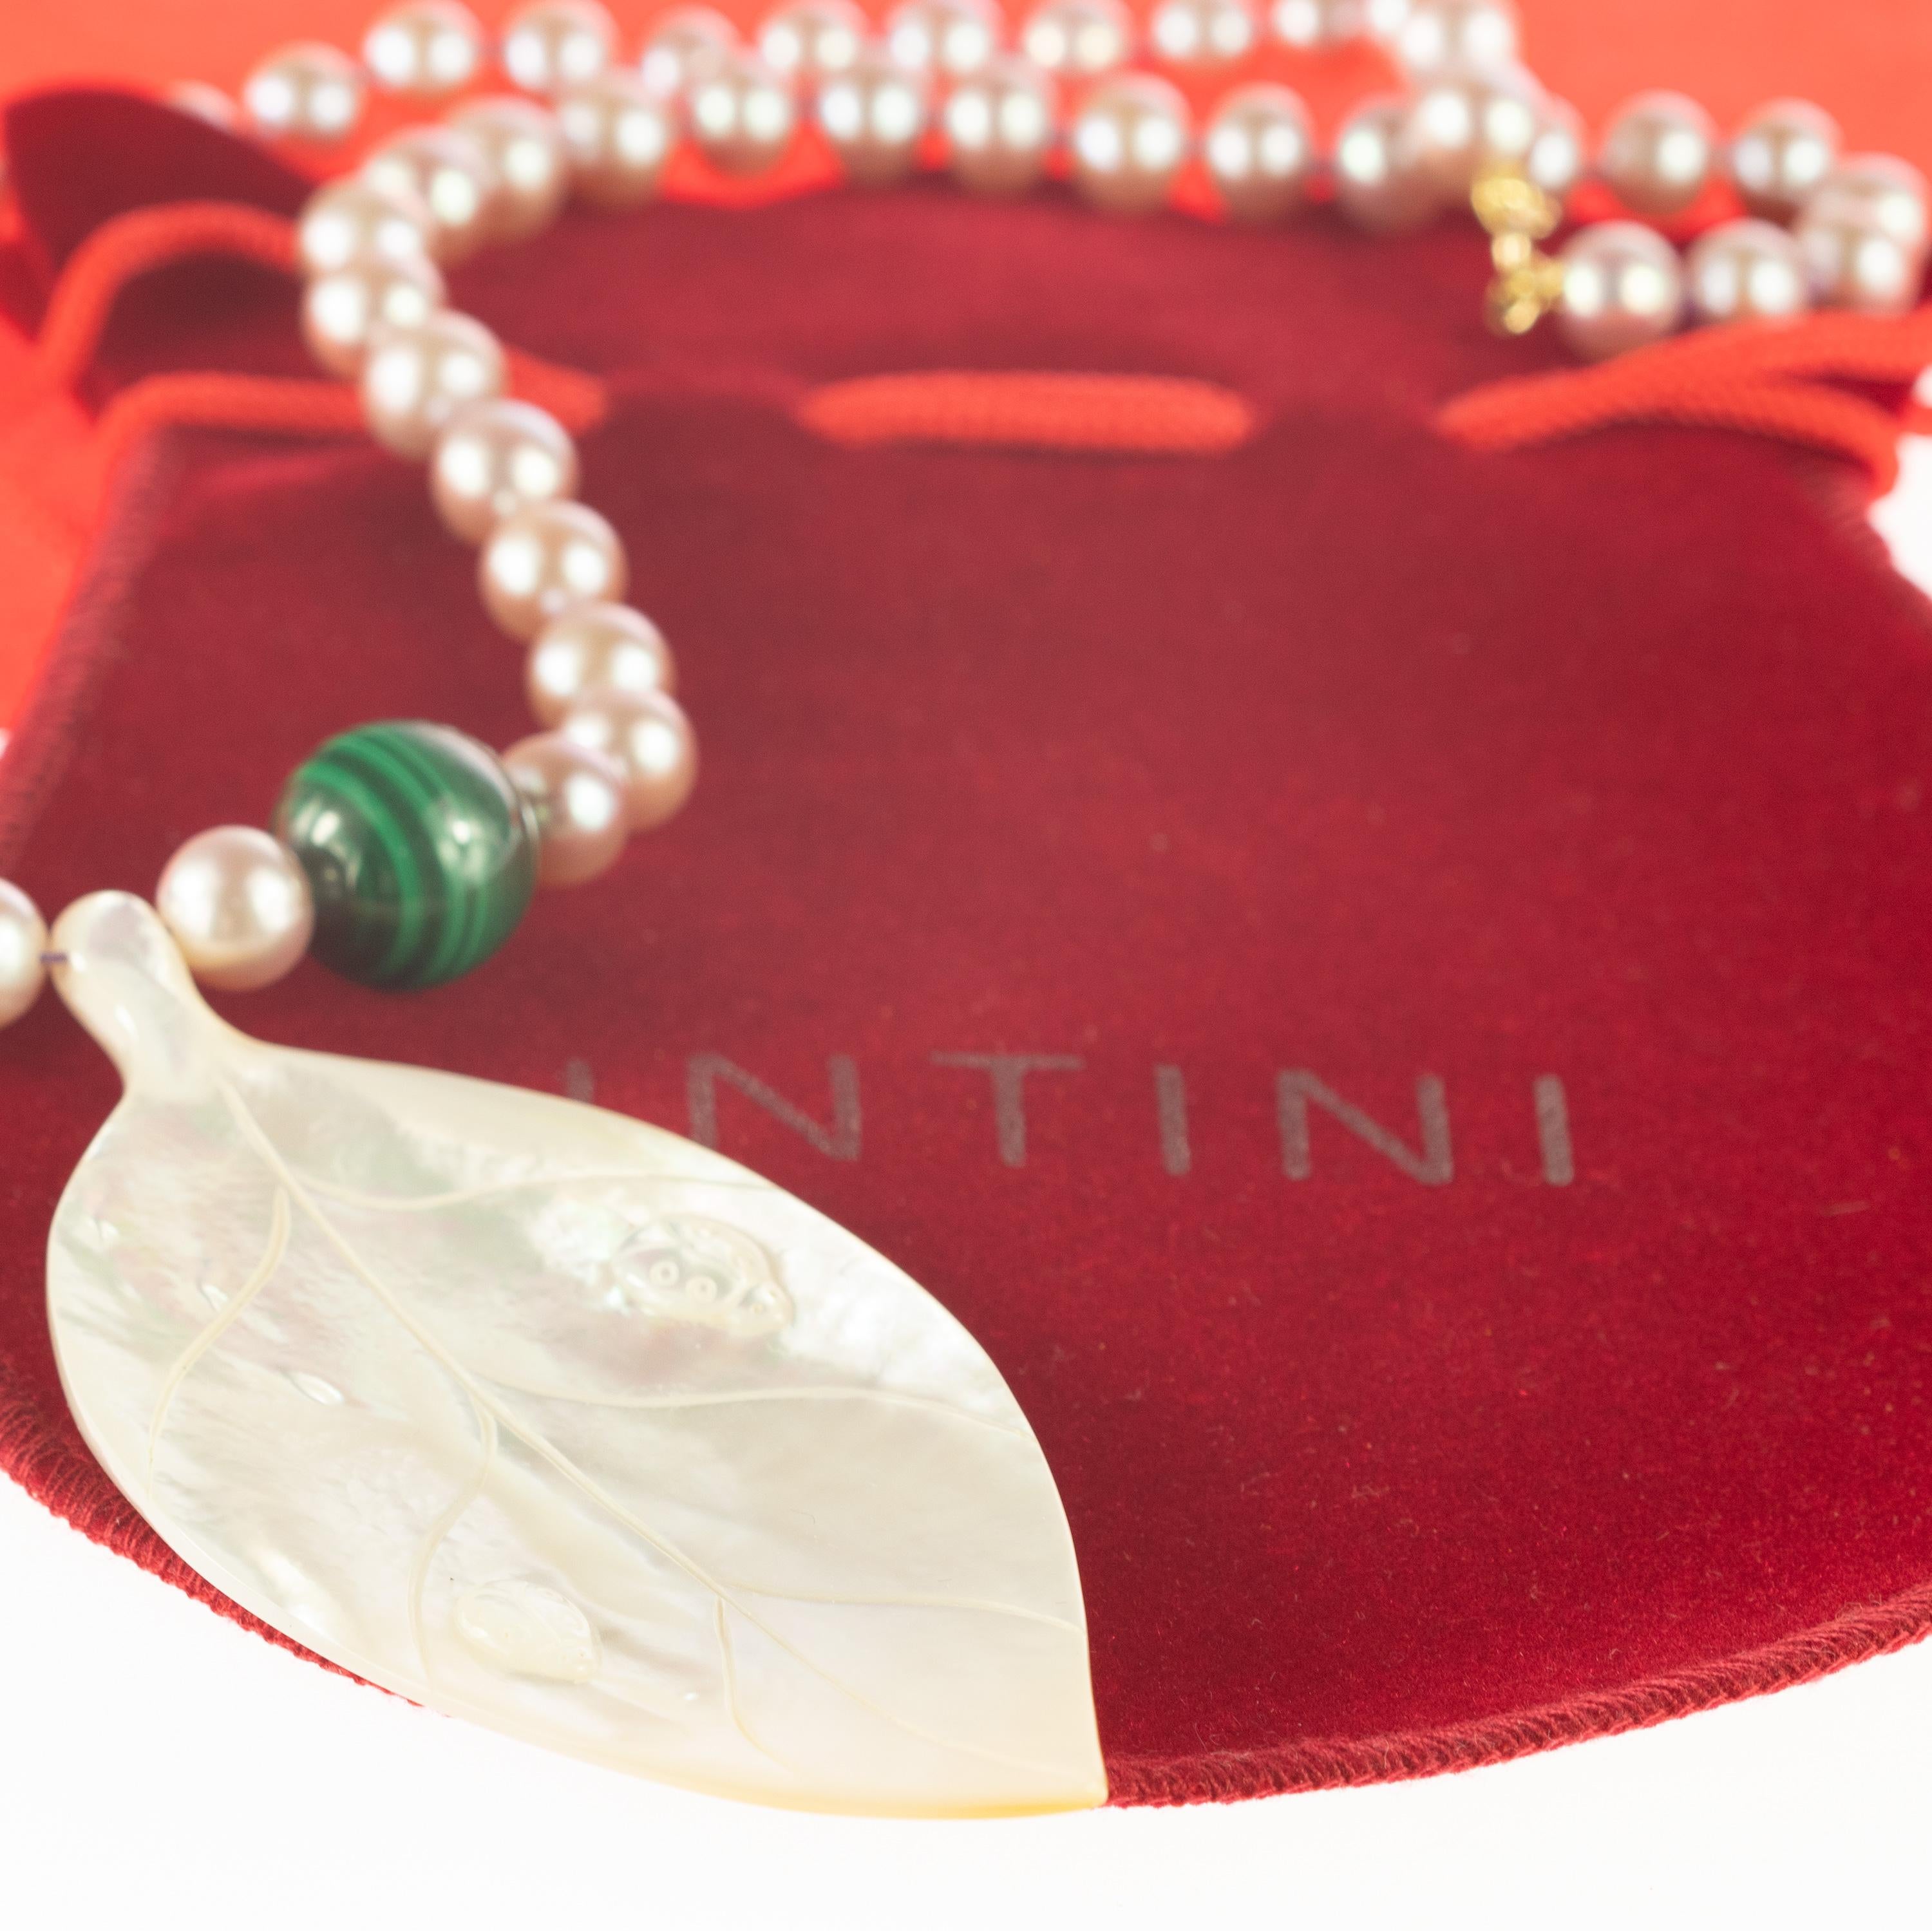 First class natural freshwater pink pearls with an elegant closure in 18k white gold. An iconic collier for an elegant outfit. A timeless carved and tribal design a natural mother pearl leaf adorned with round malachite spheres. Top quality